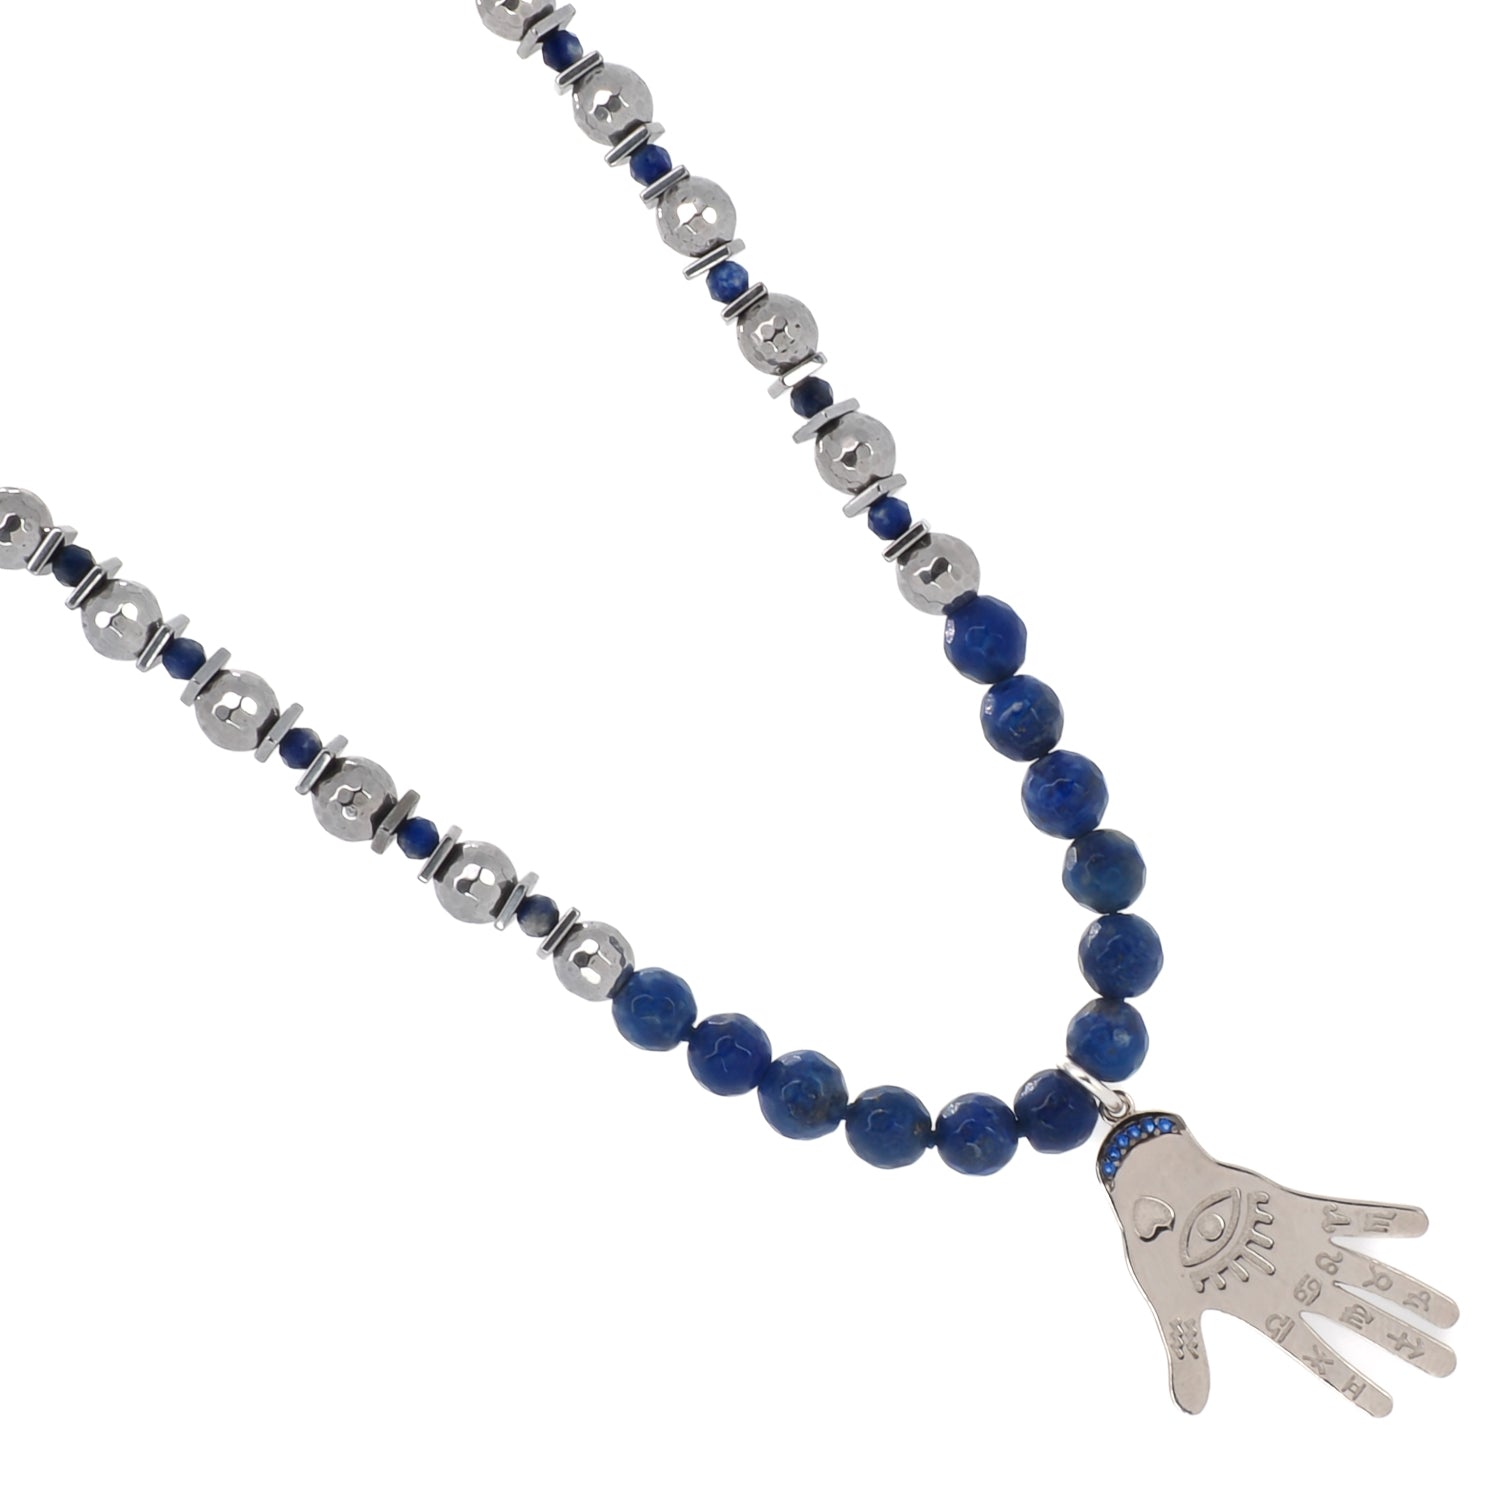 Symbol of Good Luck and Protection - Hamsa Necklace with Lapis Lazuli stones.